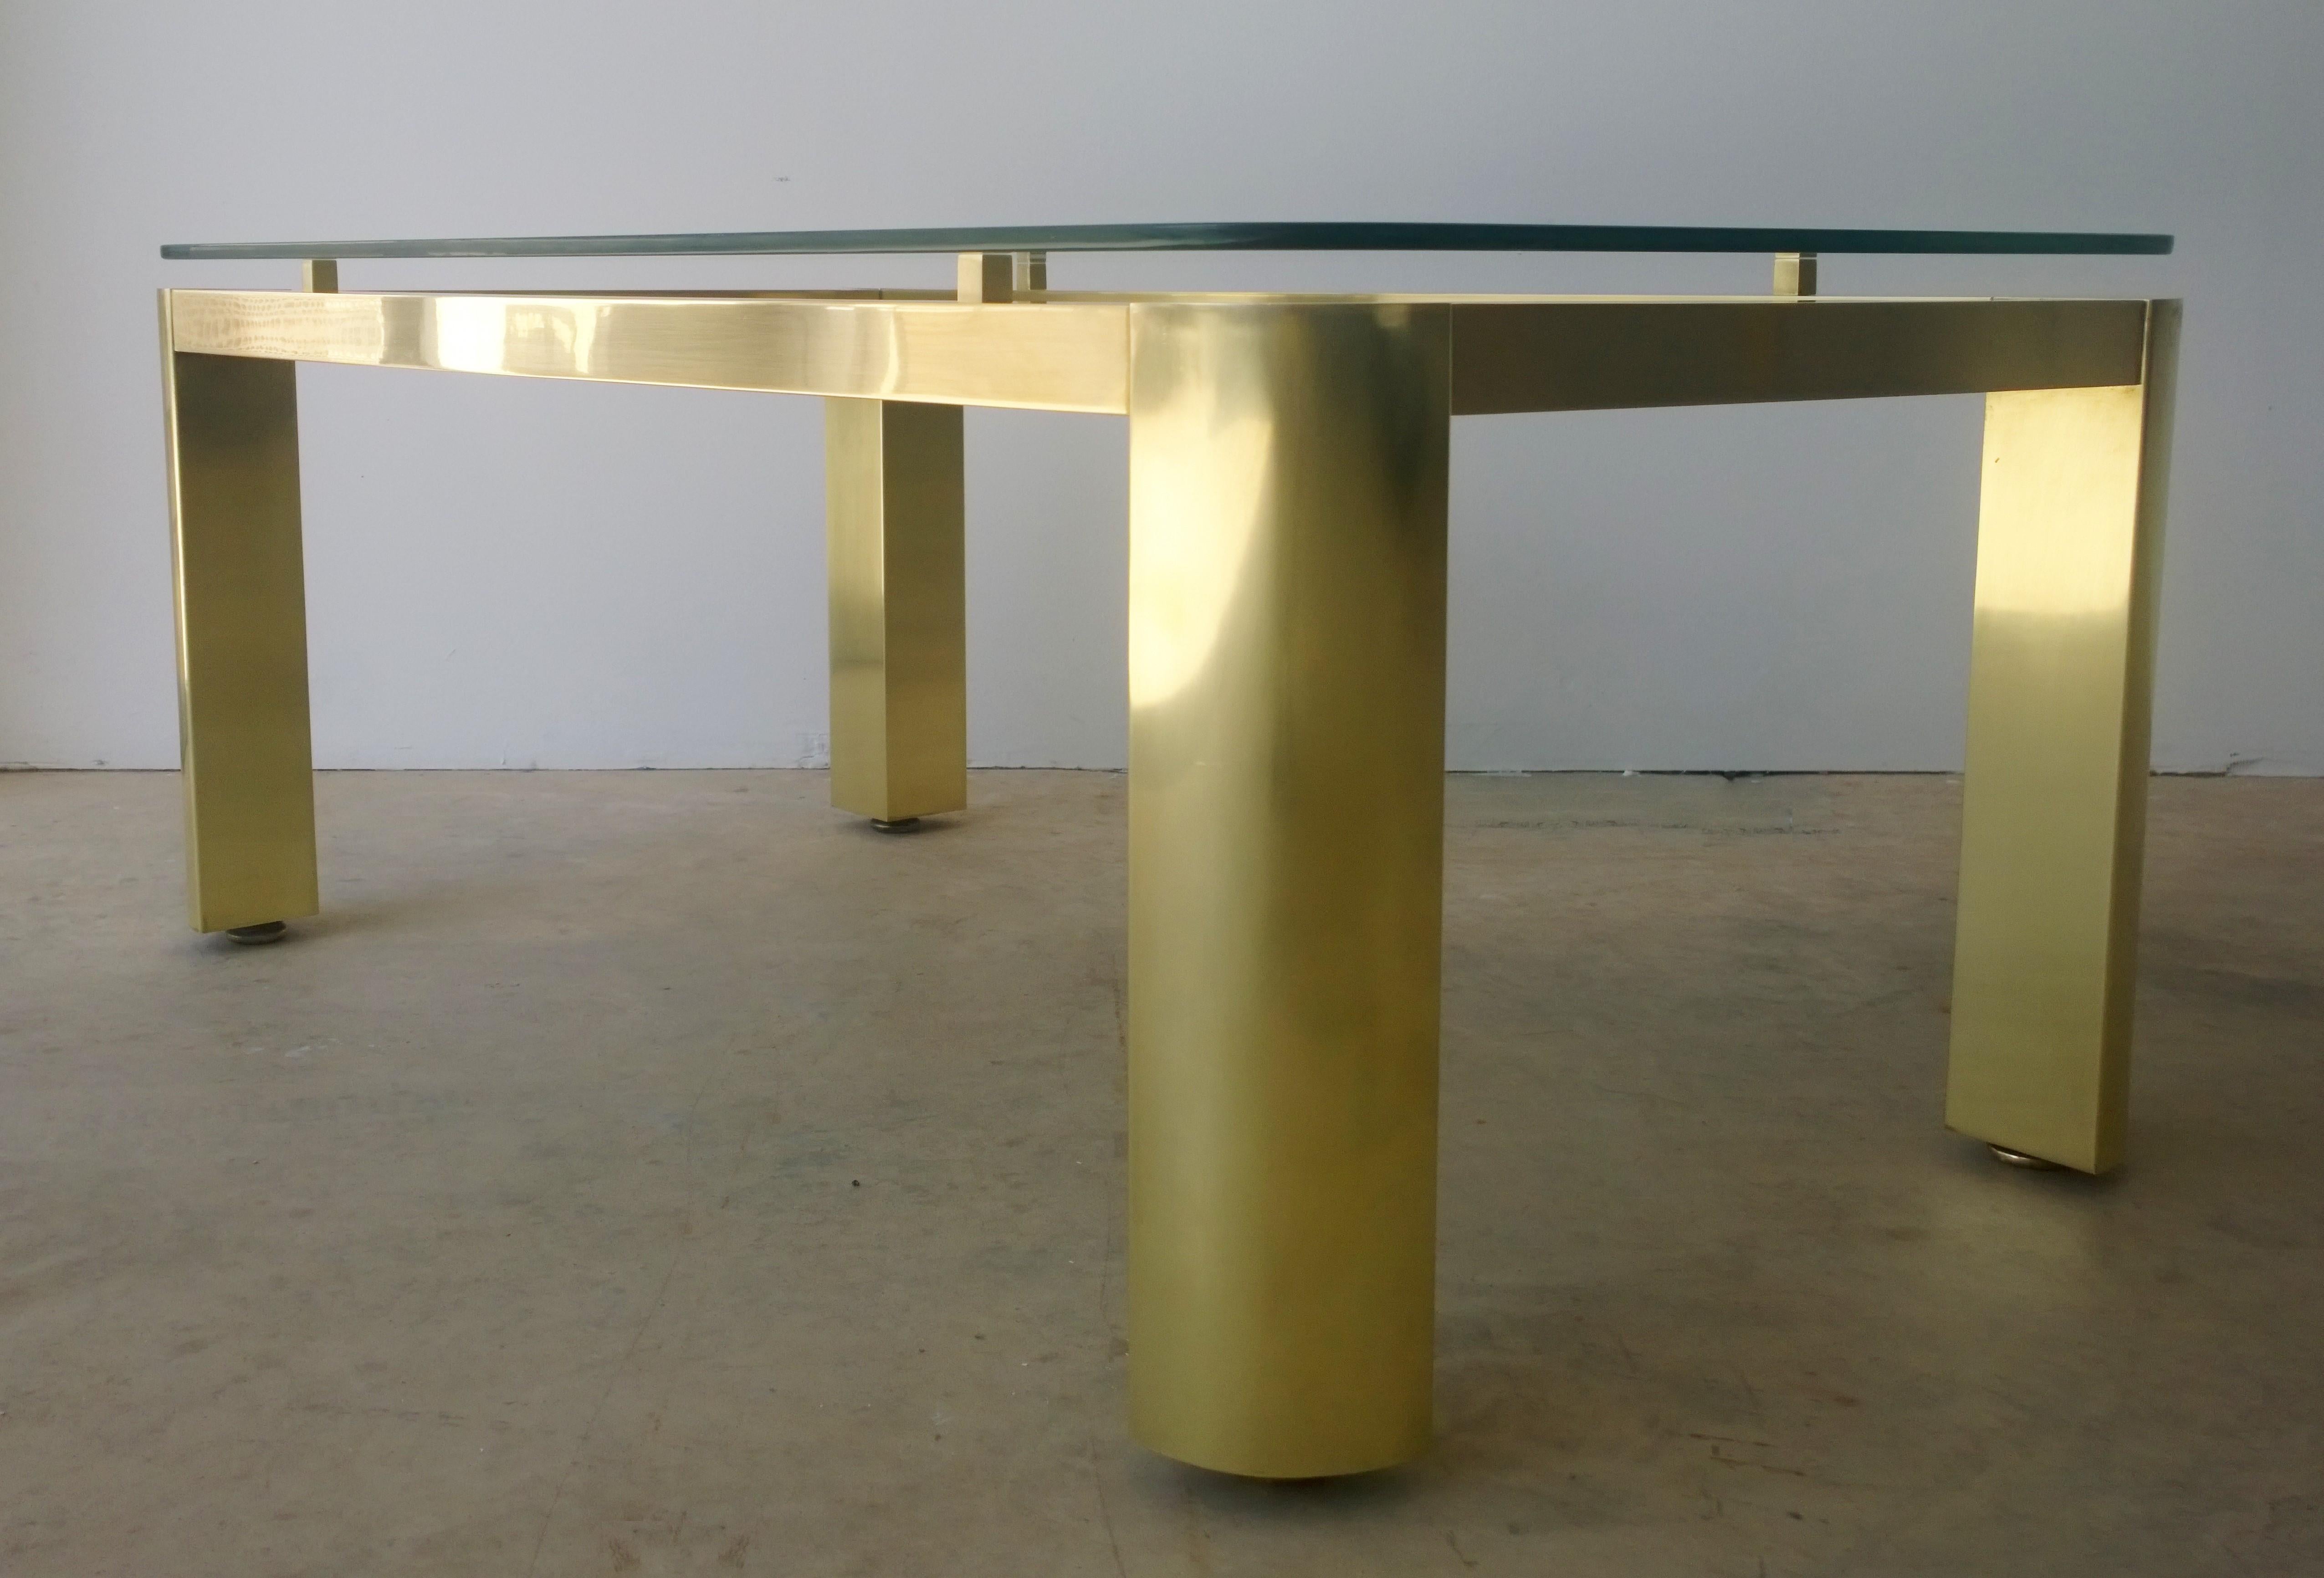 Offered is a Mid-Century Modern fully restored Pace brass, rounded edge floating glass and adjustable feet rectangular cocktail or coffee table. This substantial lacquered shiny brass coffee table with clean and modern design lines is highlighted by